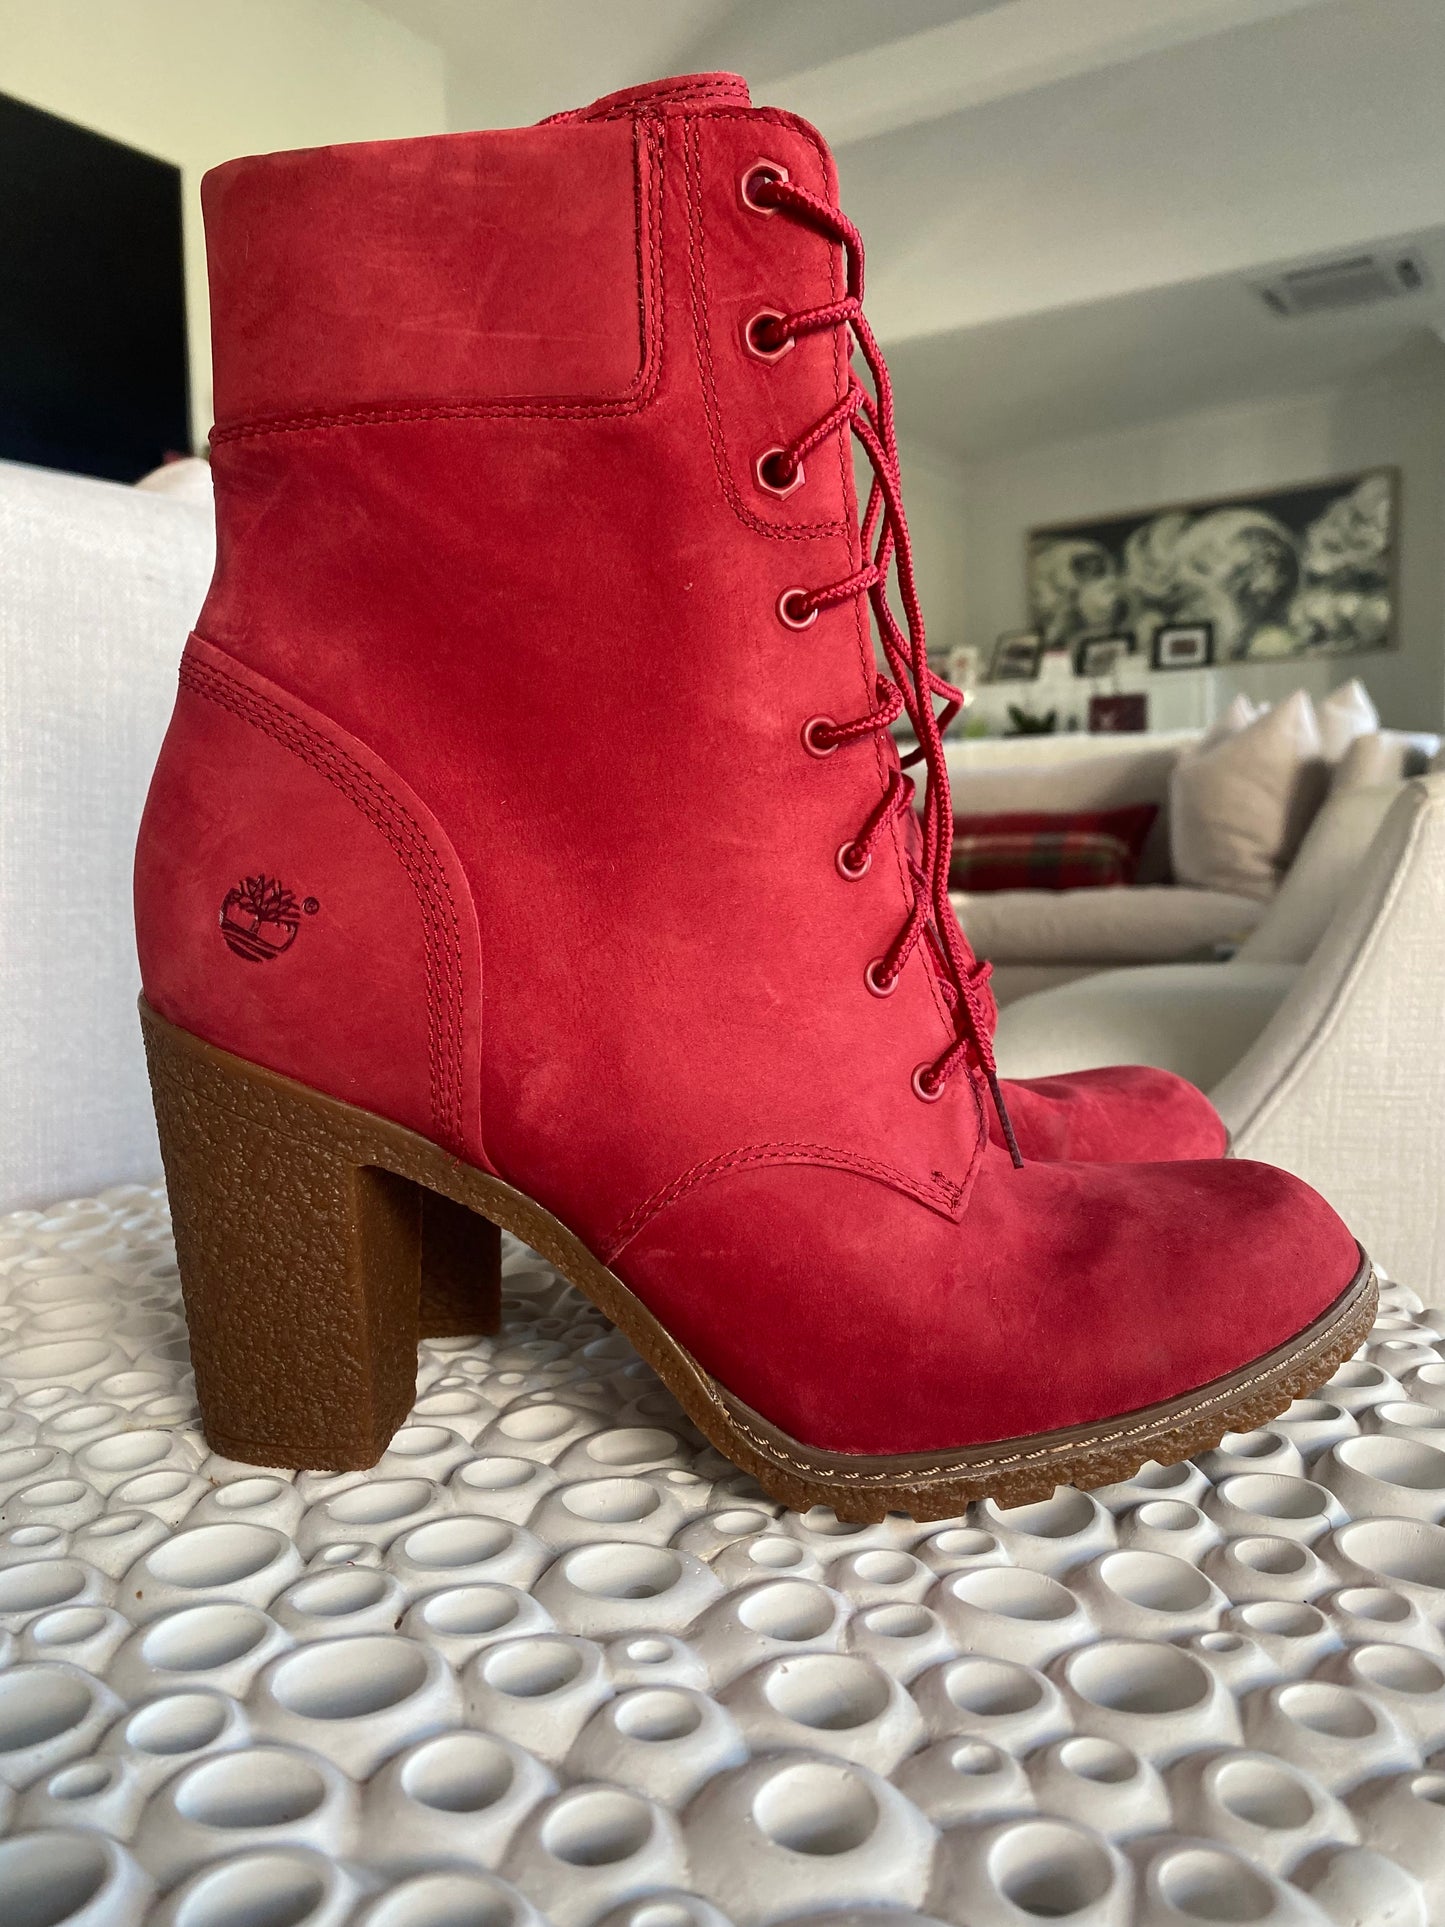 Timberland Women's Limited Ruby Red Suede Leather High Heel Boots - 10